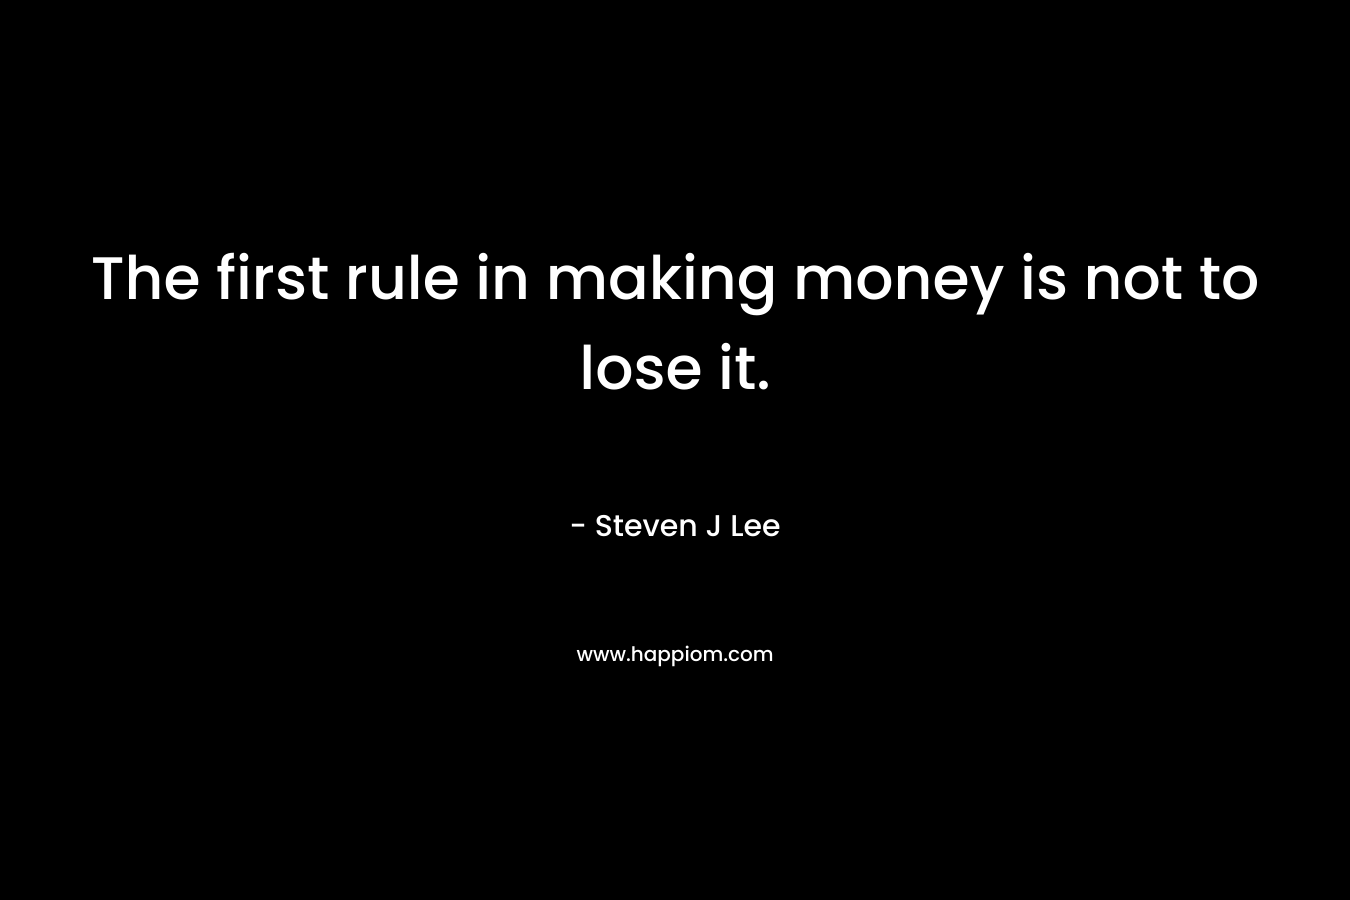 The first rule in making money is not to lose it.